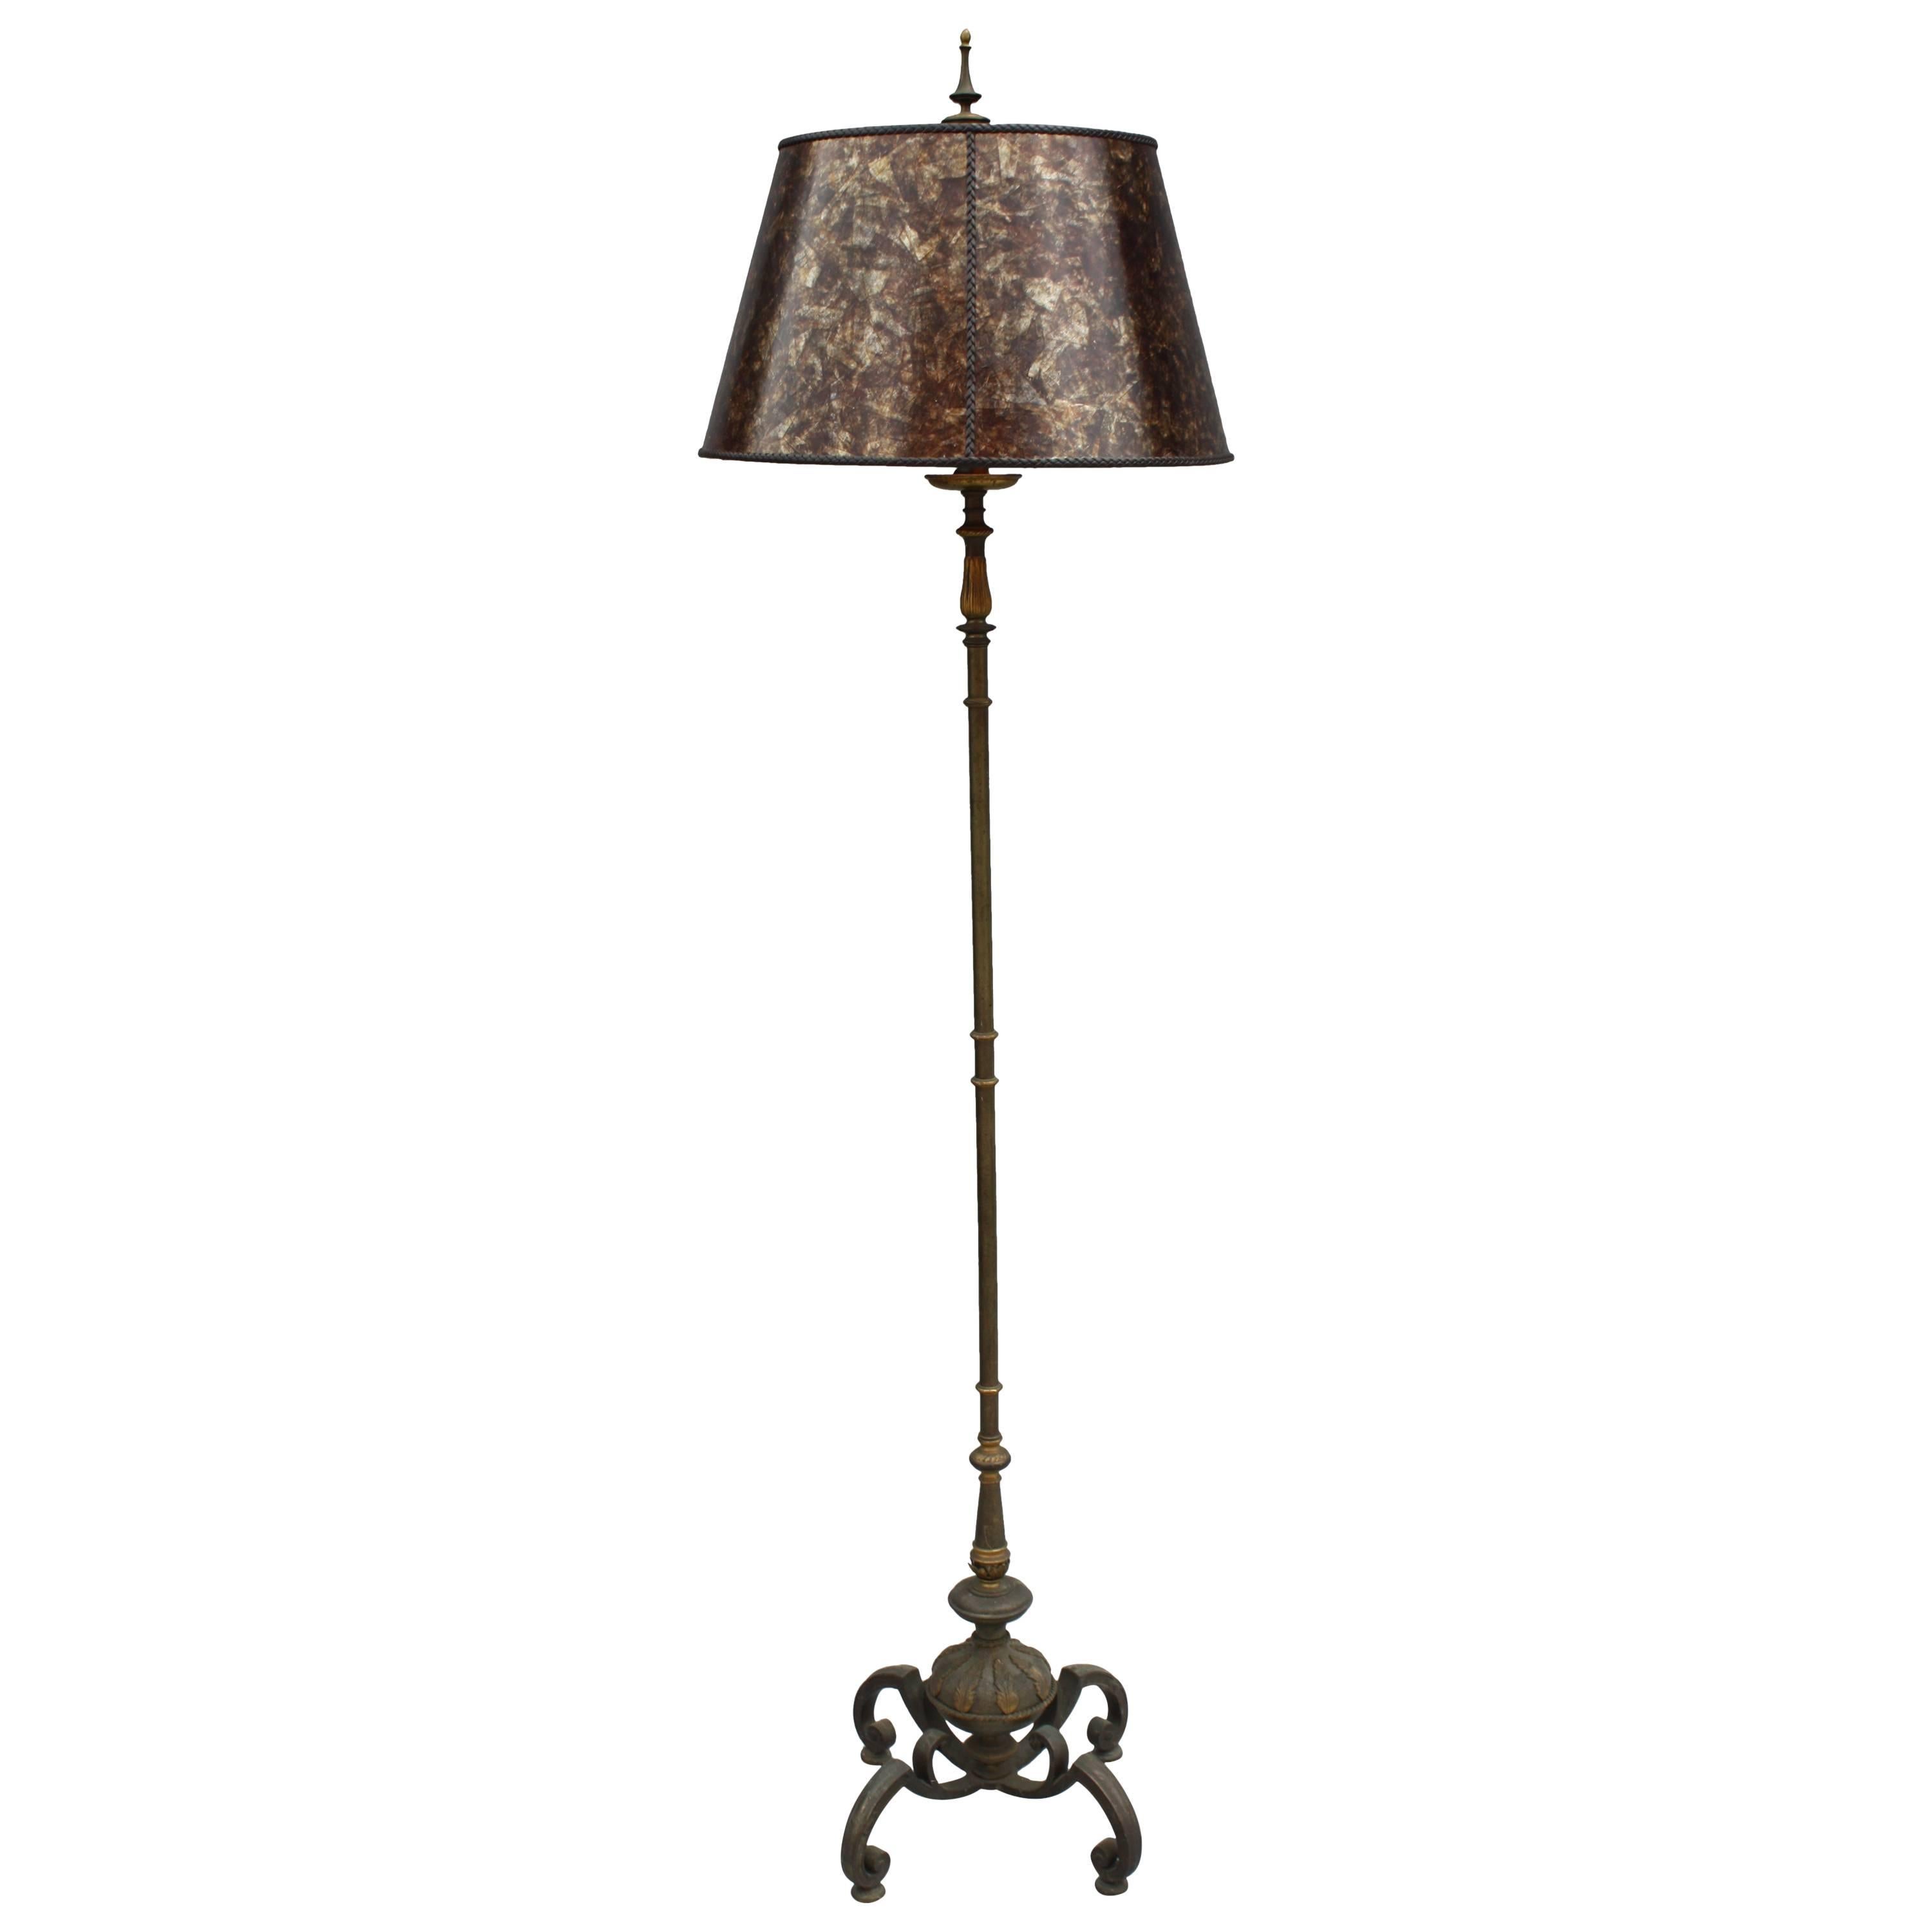 1920s Spanish Revival Floor Lamp with Mica Shade